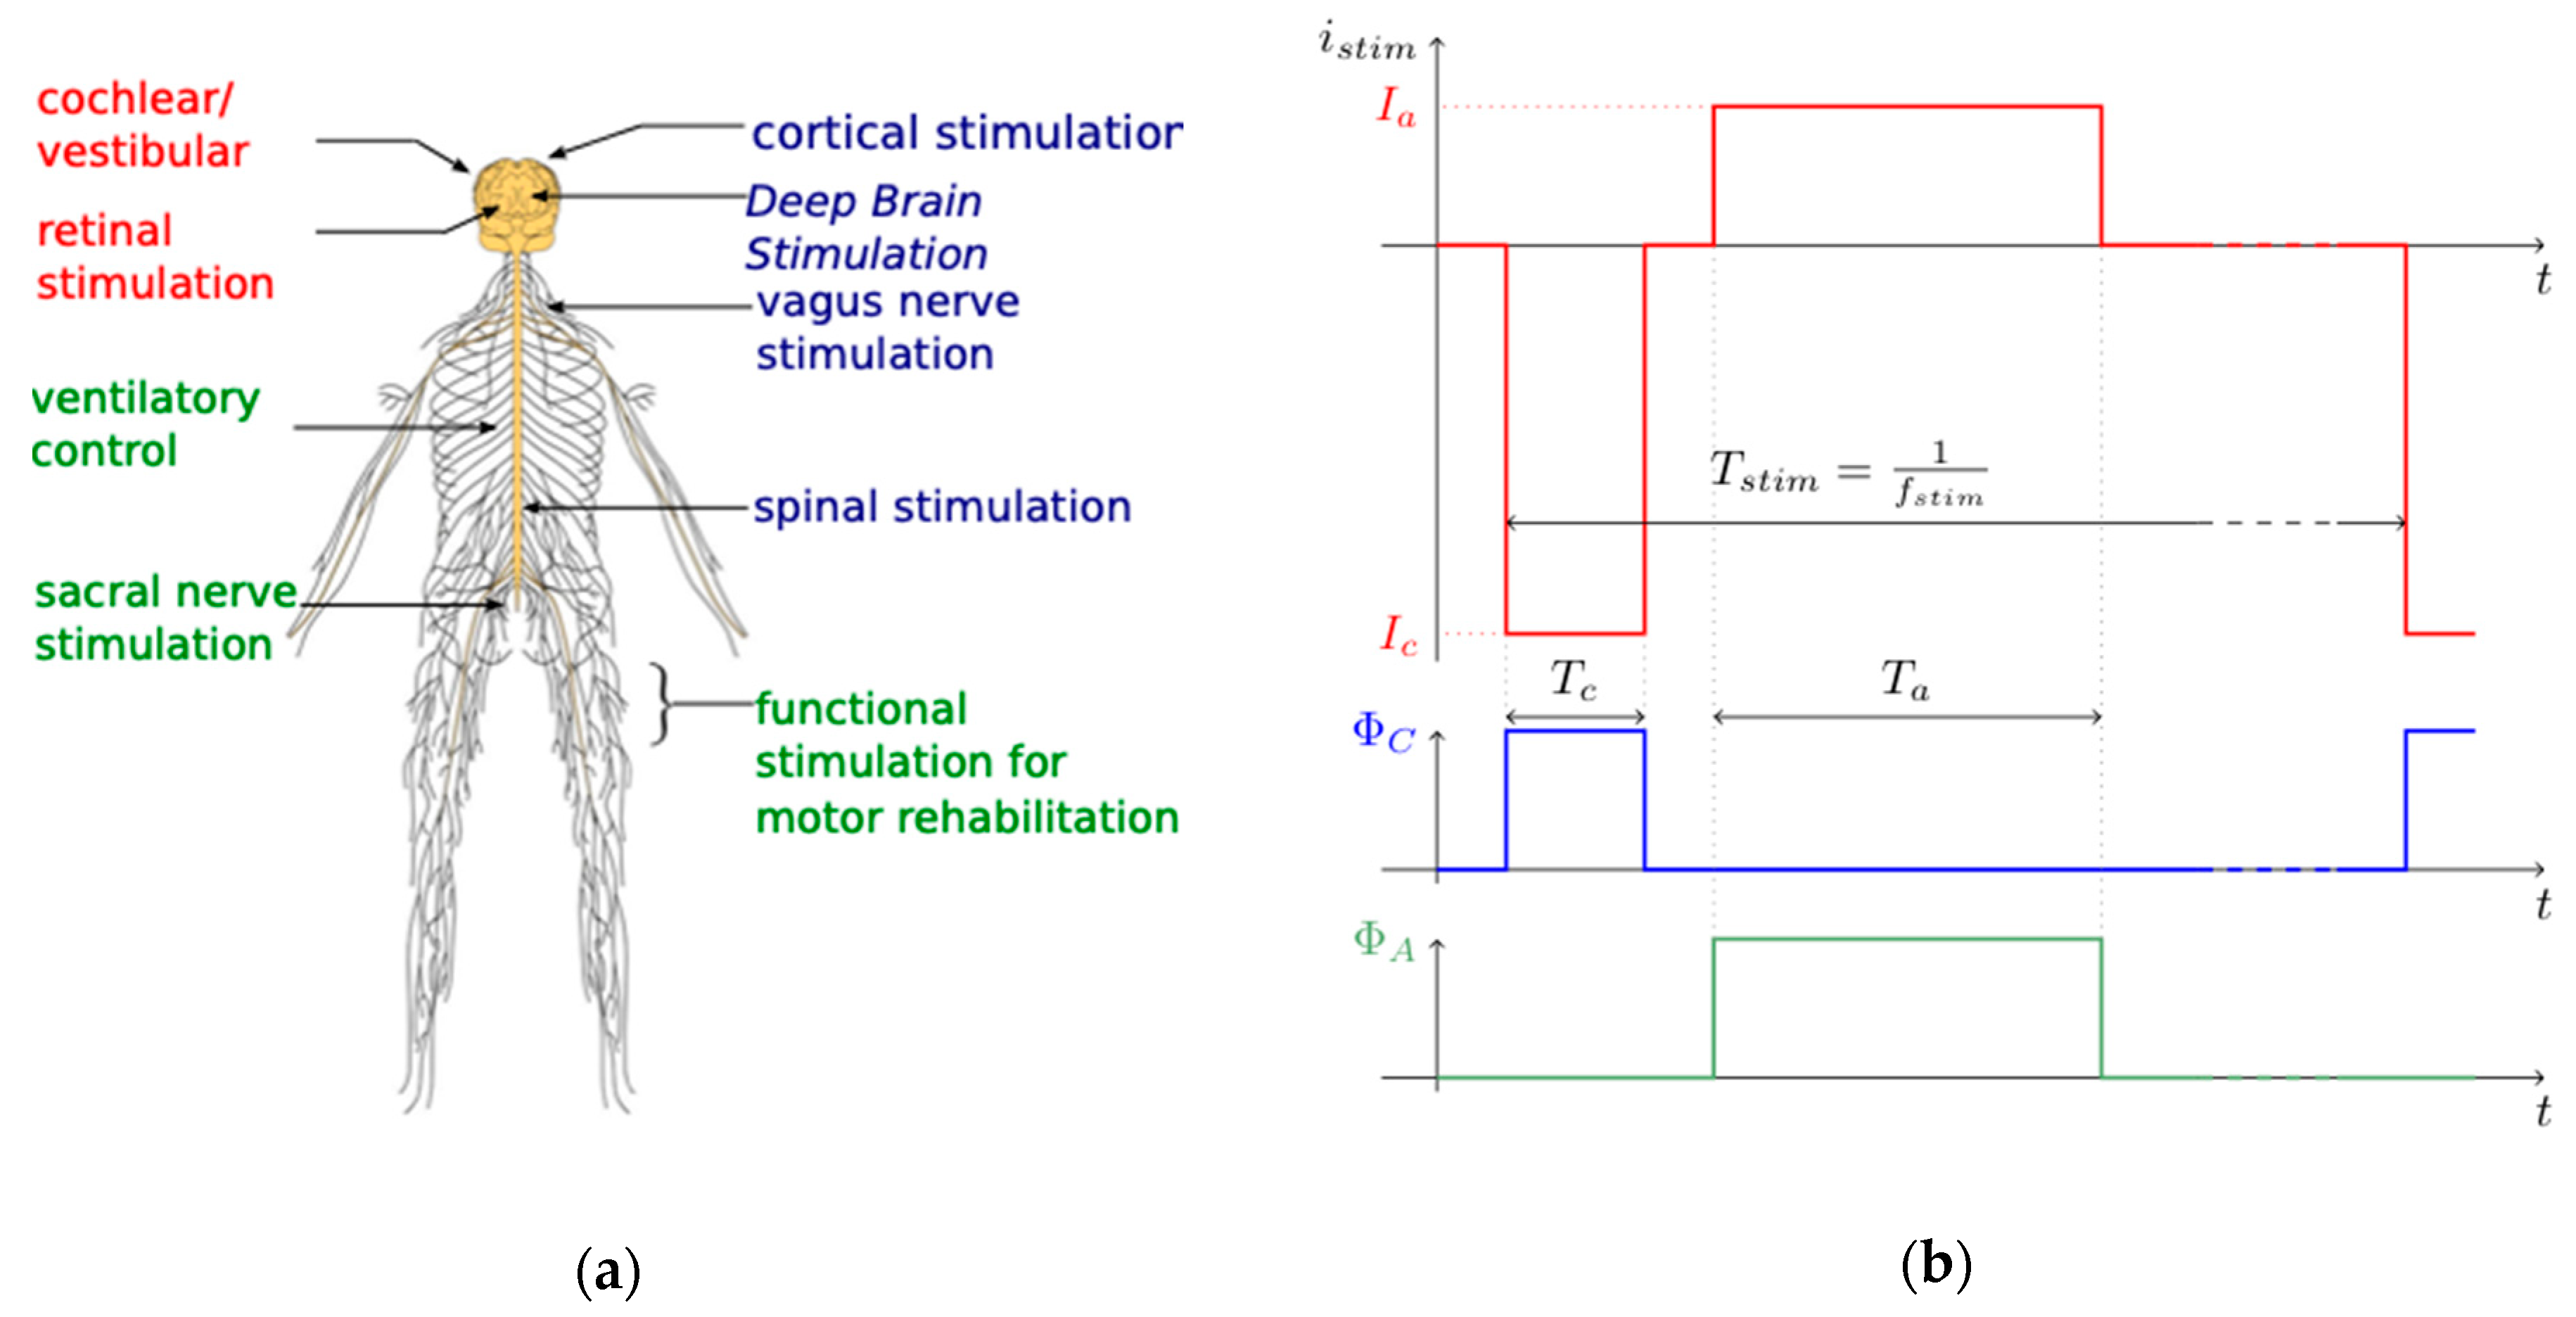 Types of Electrical Stimulation: Understanding Taxonomy of Waves